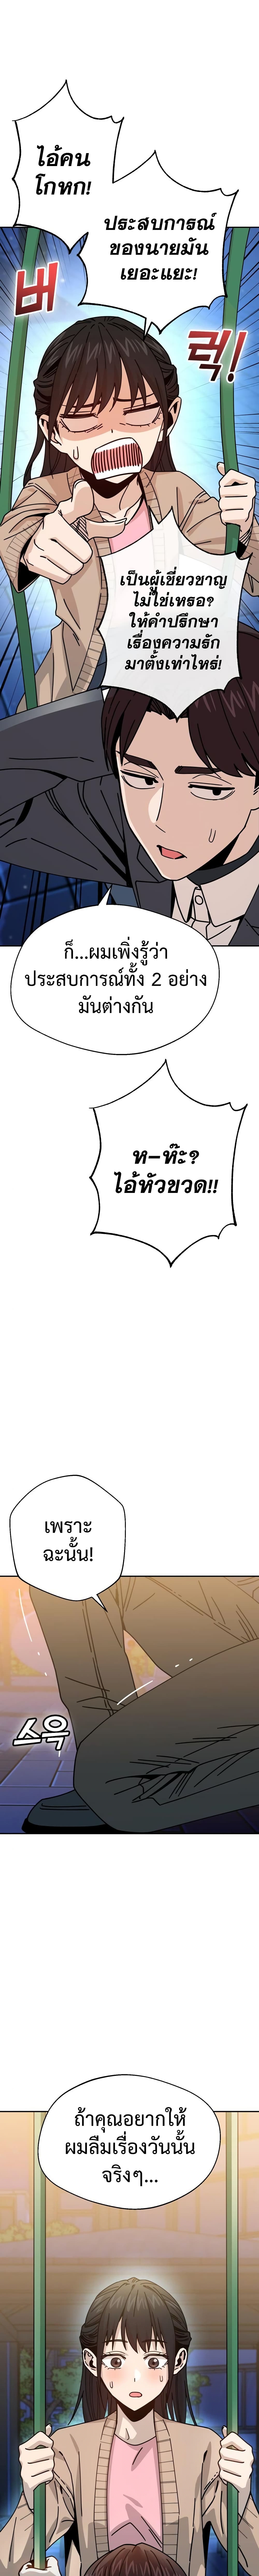 Match Made in Heaven by chance ตอนที่ 19 (20)